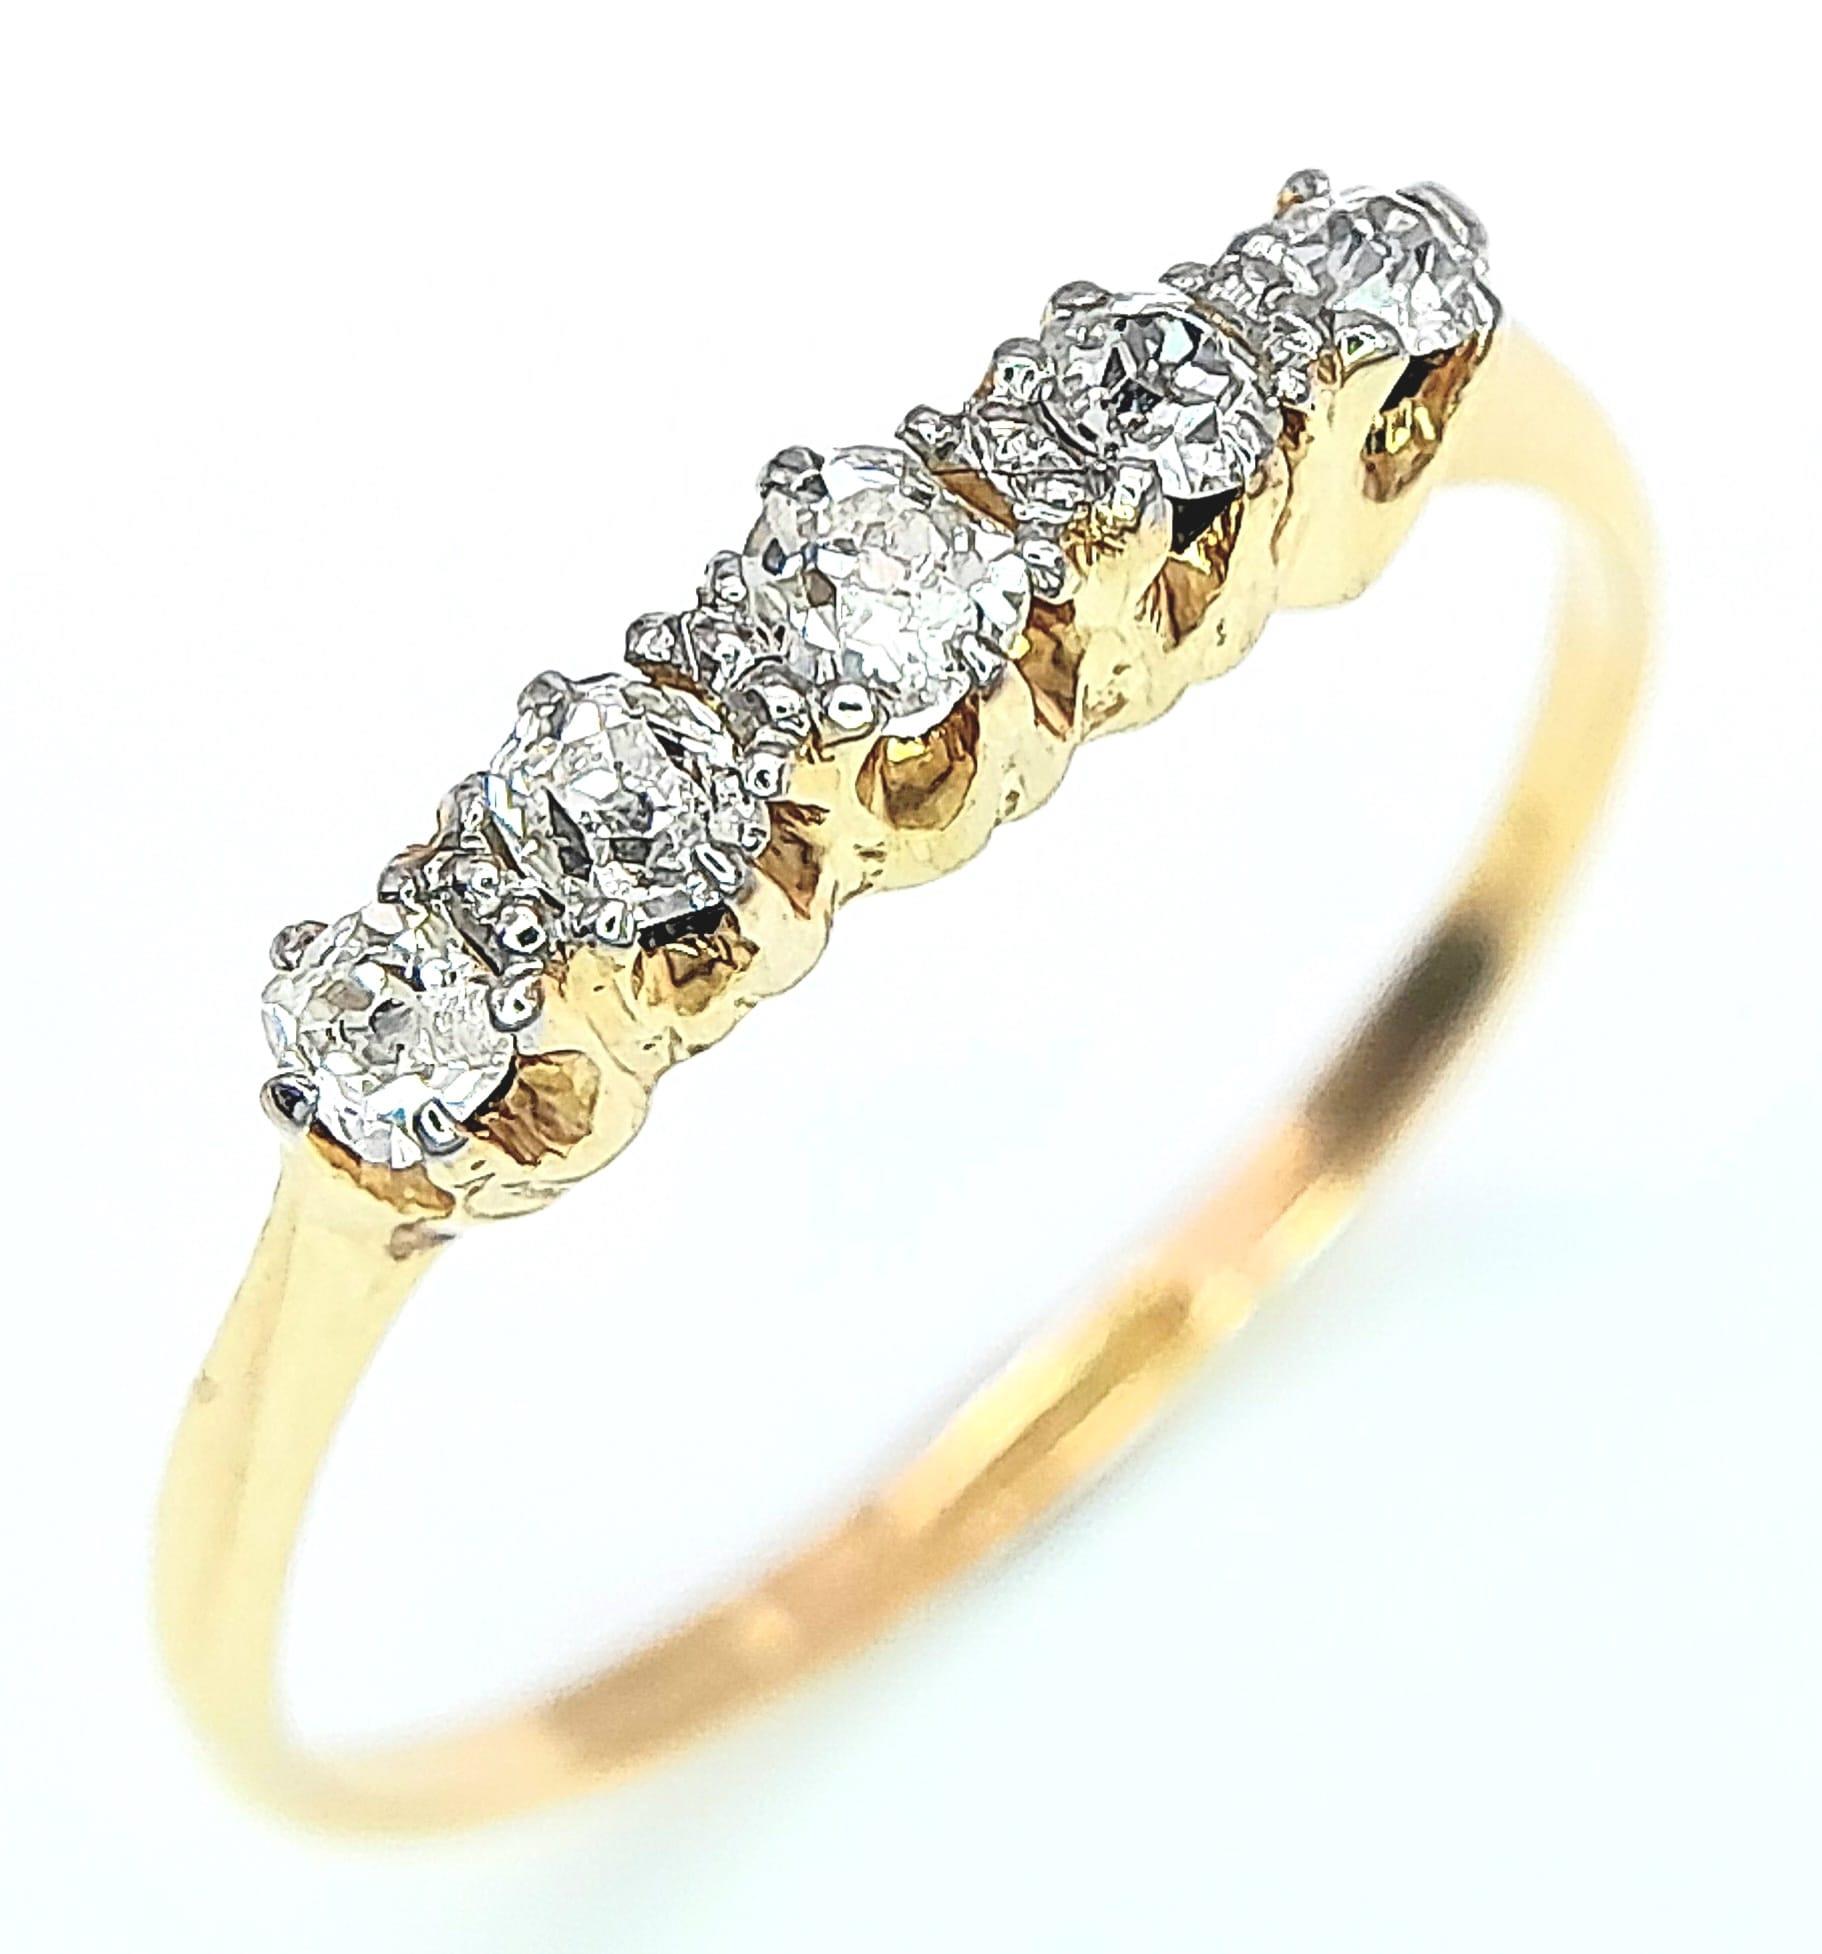 An 18K Yellow Gold and Platinum Vintage Old Cut Diamond 5 Stone Ring. 0.20ctw, Size M, 1.5g total - Image 7 of 11